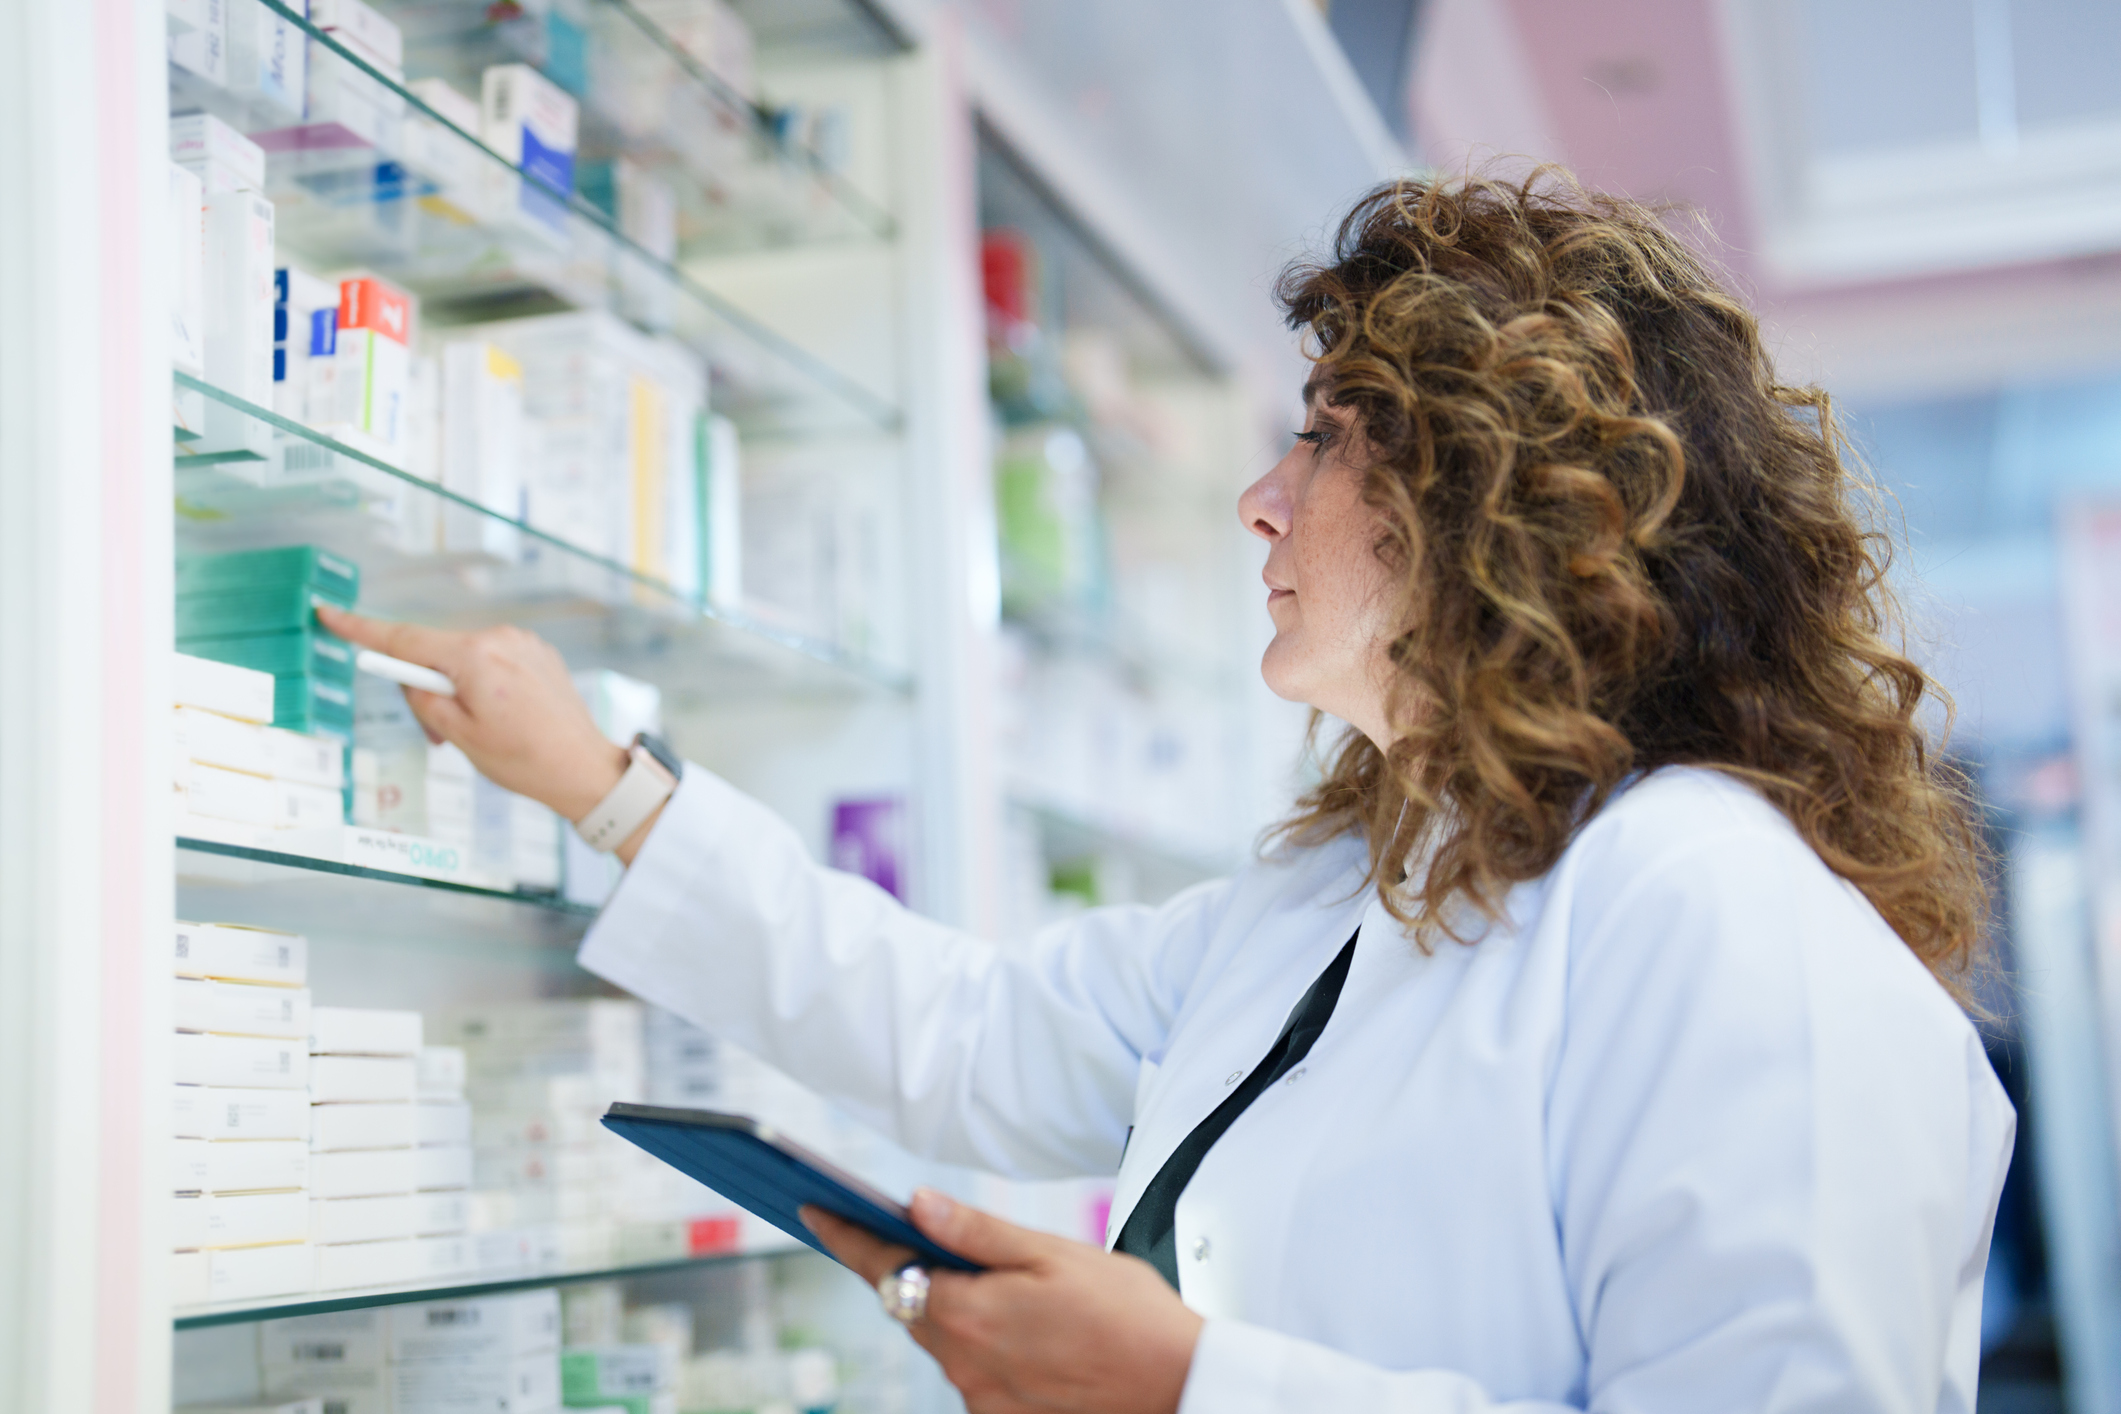 Pharmacist using a digital tablet to do inventory in hospital or health system pharmacy